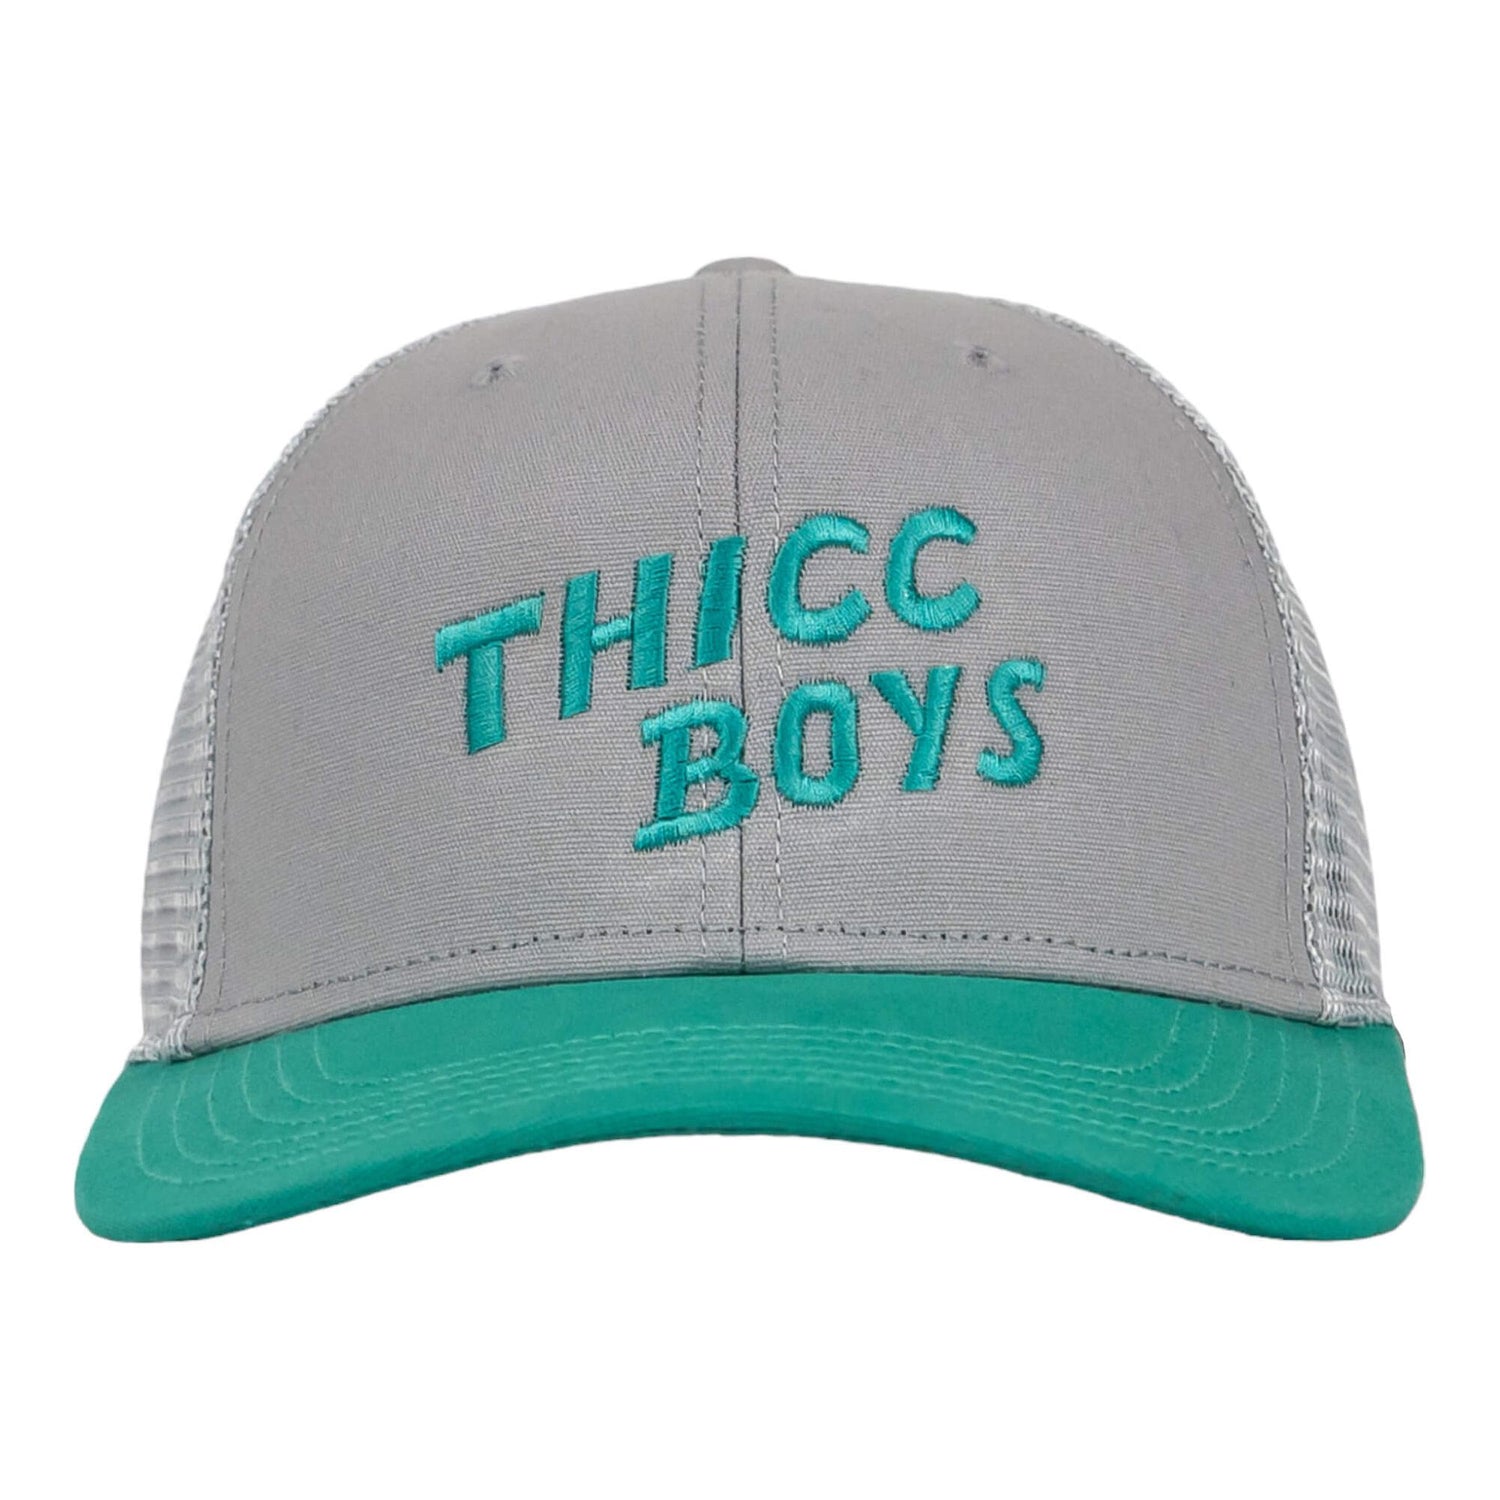 THICC BOYS Branded SnapBack